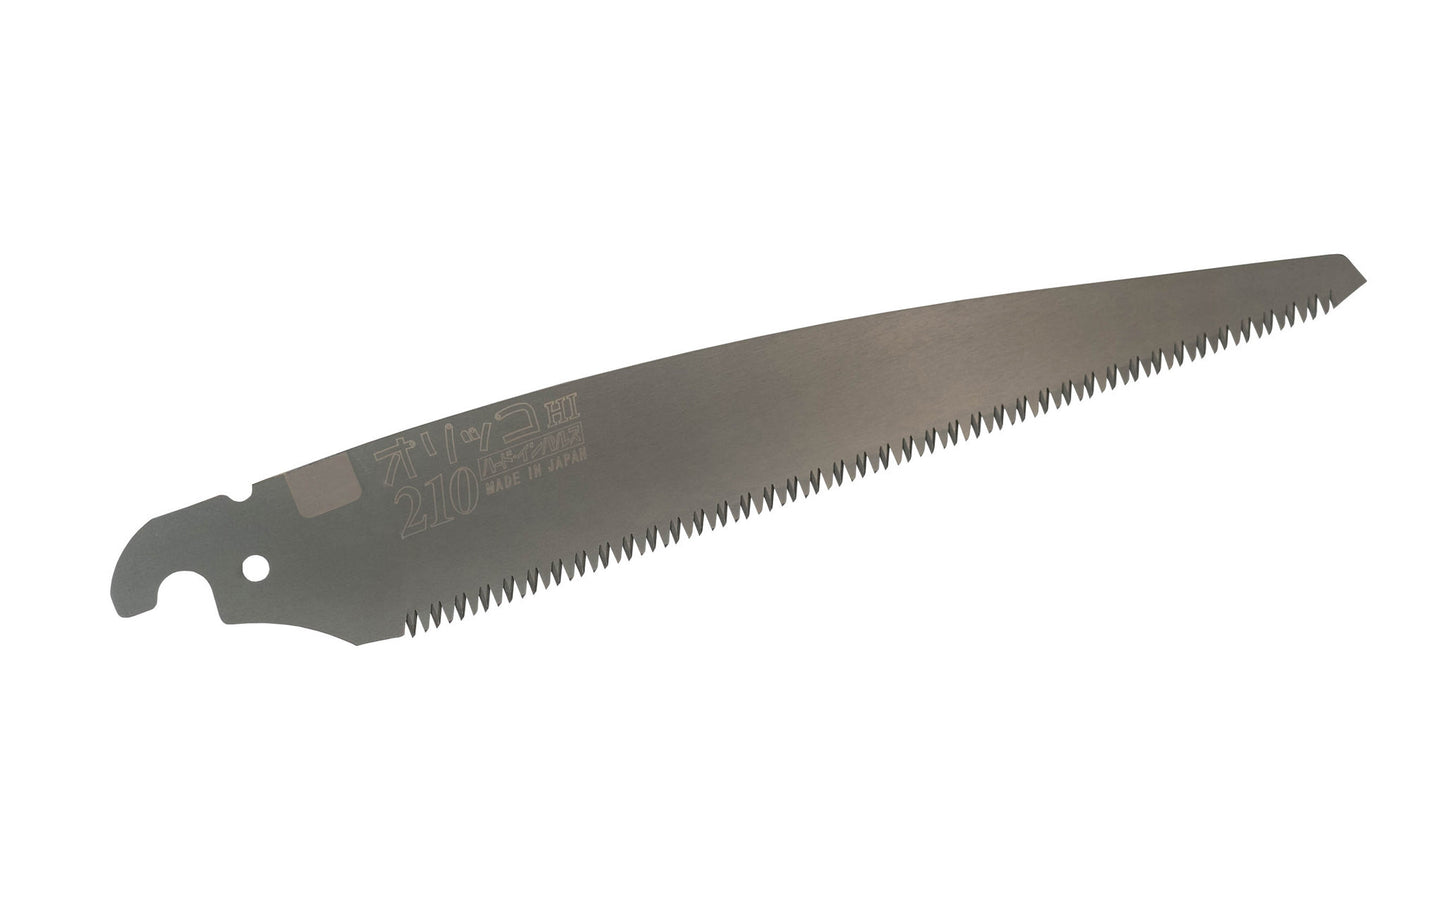 Replacement Blade for Japanese Folding All-Purpose Z-Saw ~ 210 mm "Orikko" ~Made in Japan · Crosscut Teeth: 12 TPI ~ Folding Z-Saw replacement blade 210 mm ~ For use with Folding Z-Saw 210 mm "Orikko" ~ 1-7/16" narrow blade - good for tight areas ~ Teflon coated blade helps prevent blade from staining ~ A great all-purpose Japanese pull-saw blade 